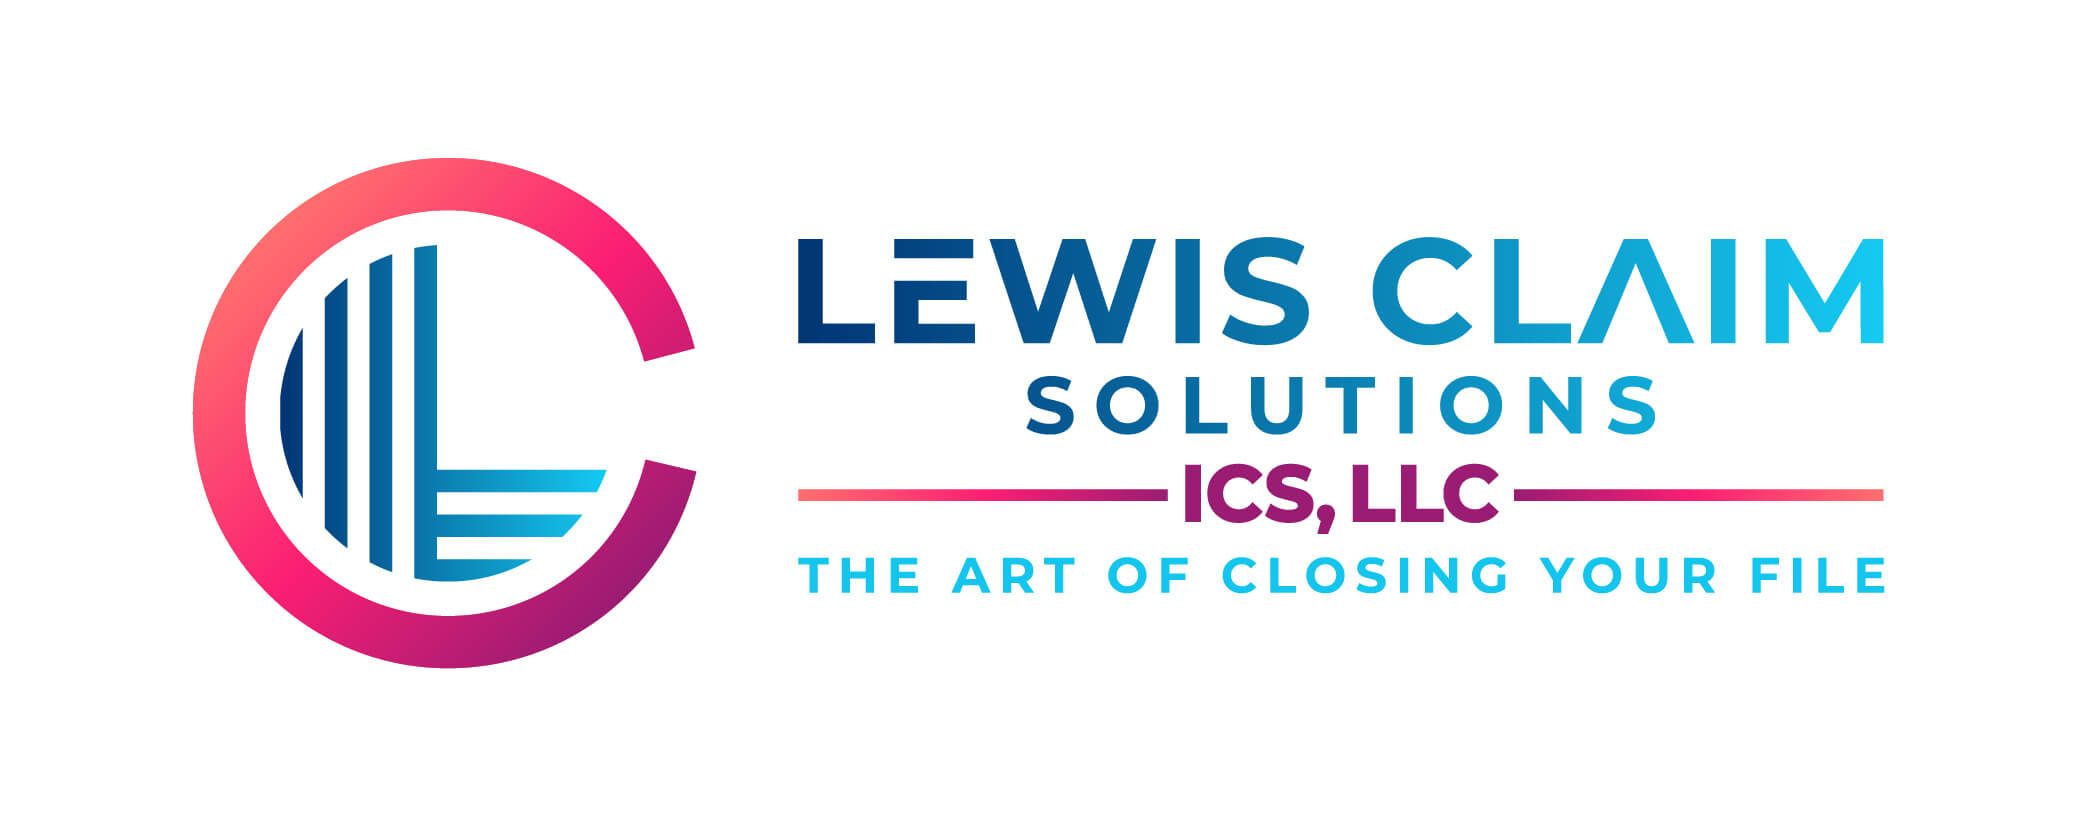 Lewis Claim Solutions Independent Consulting Solutions